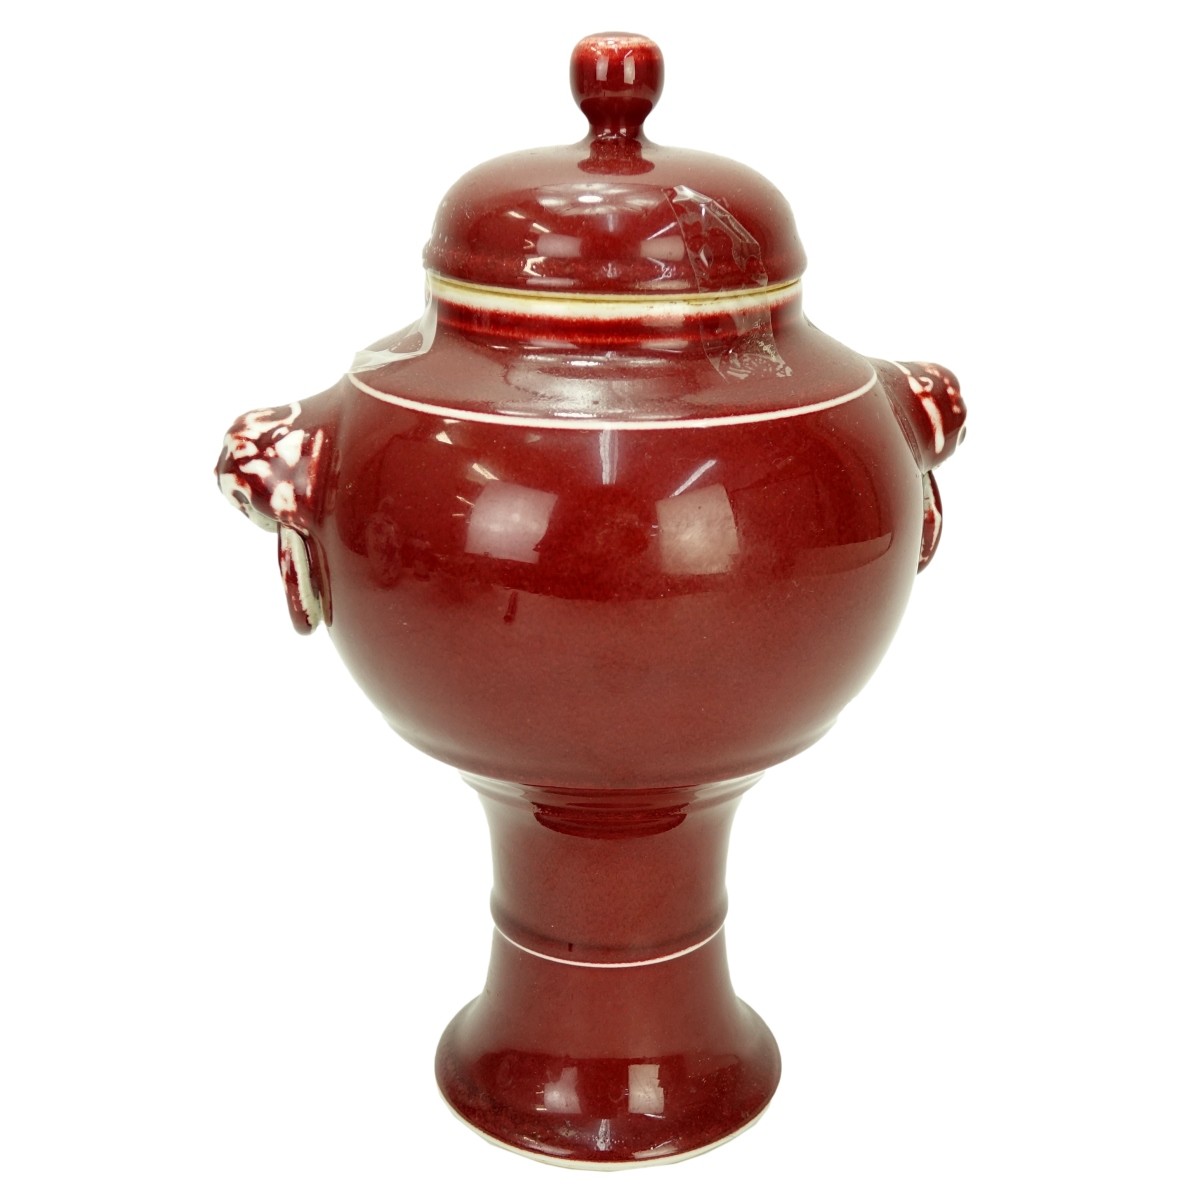 Chinese Covered Vase